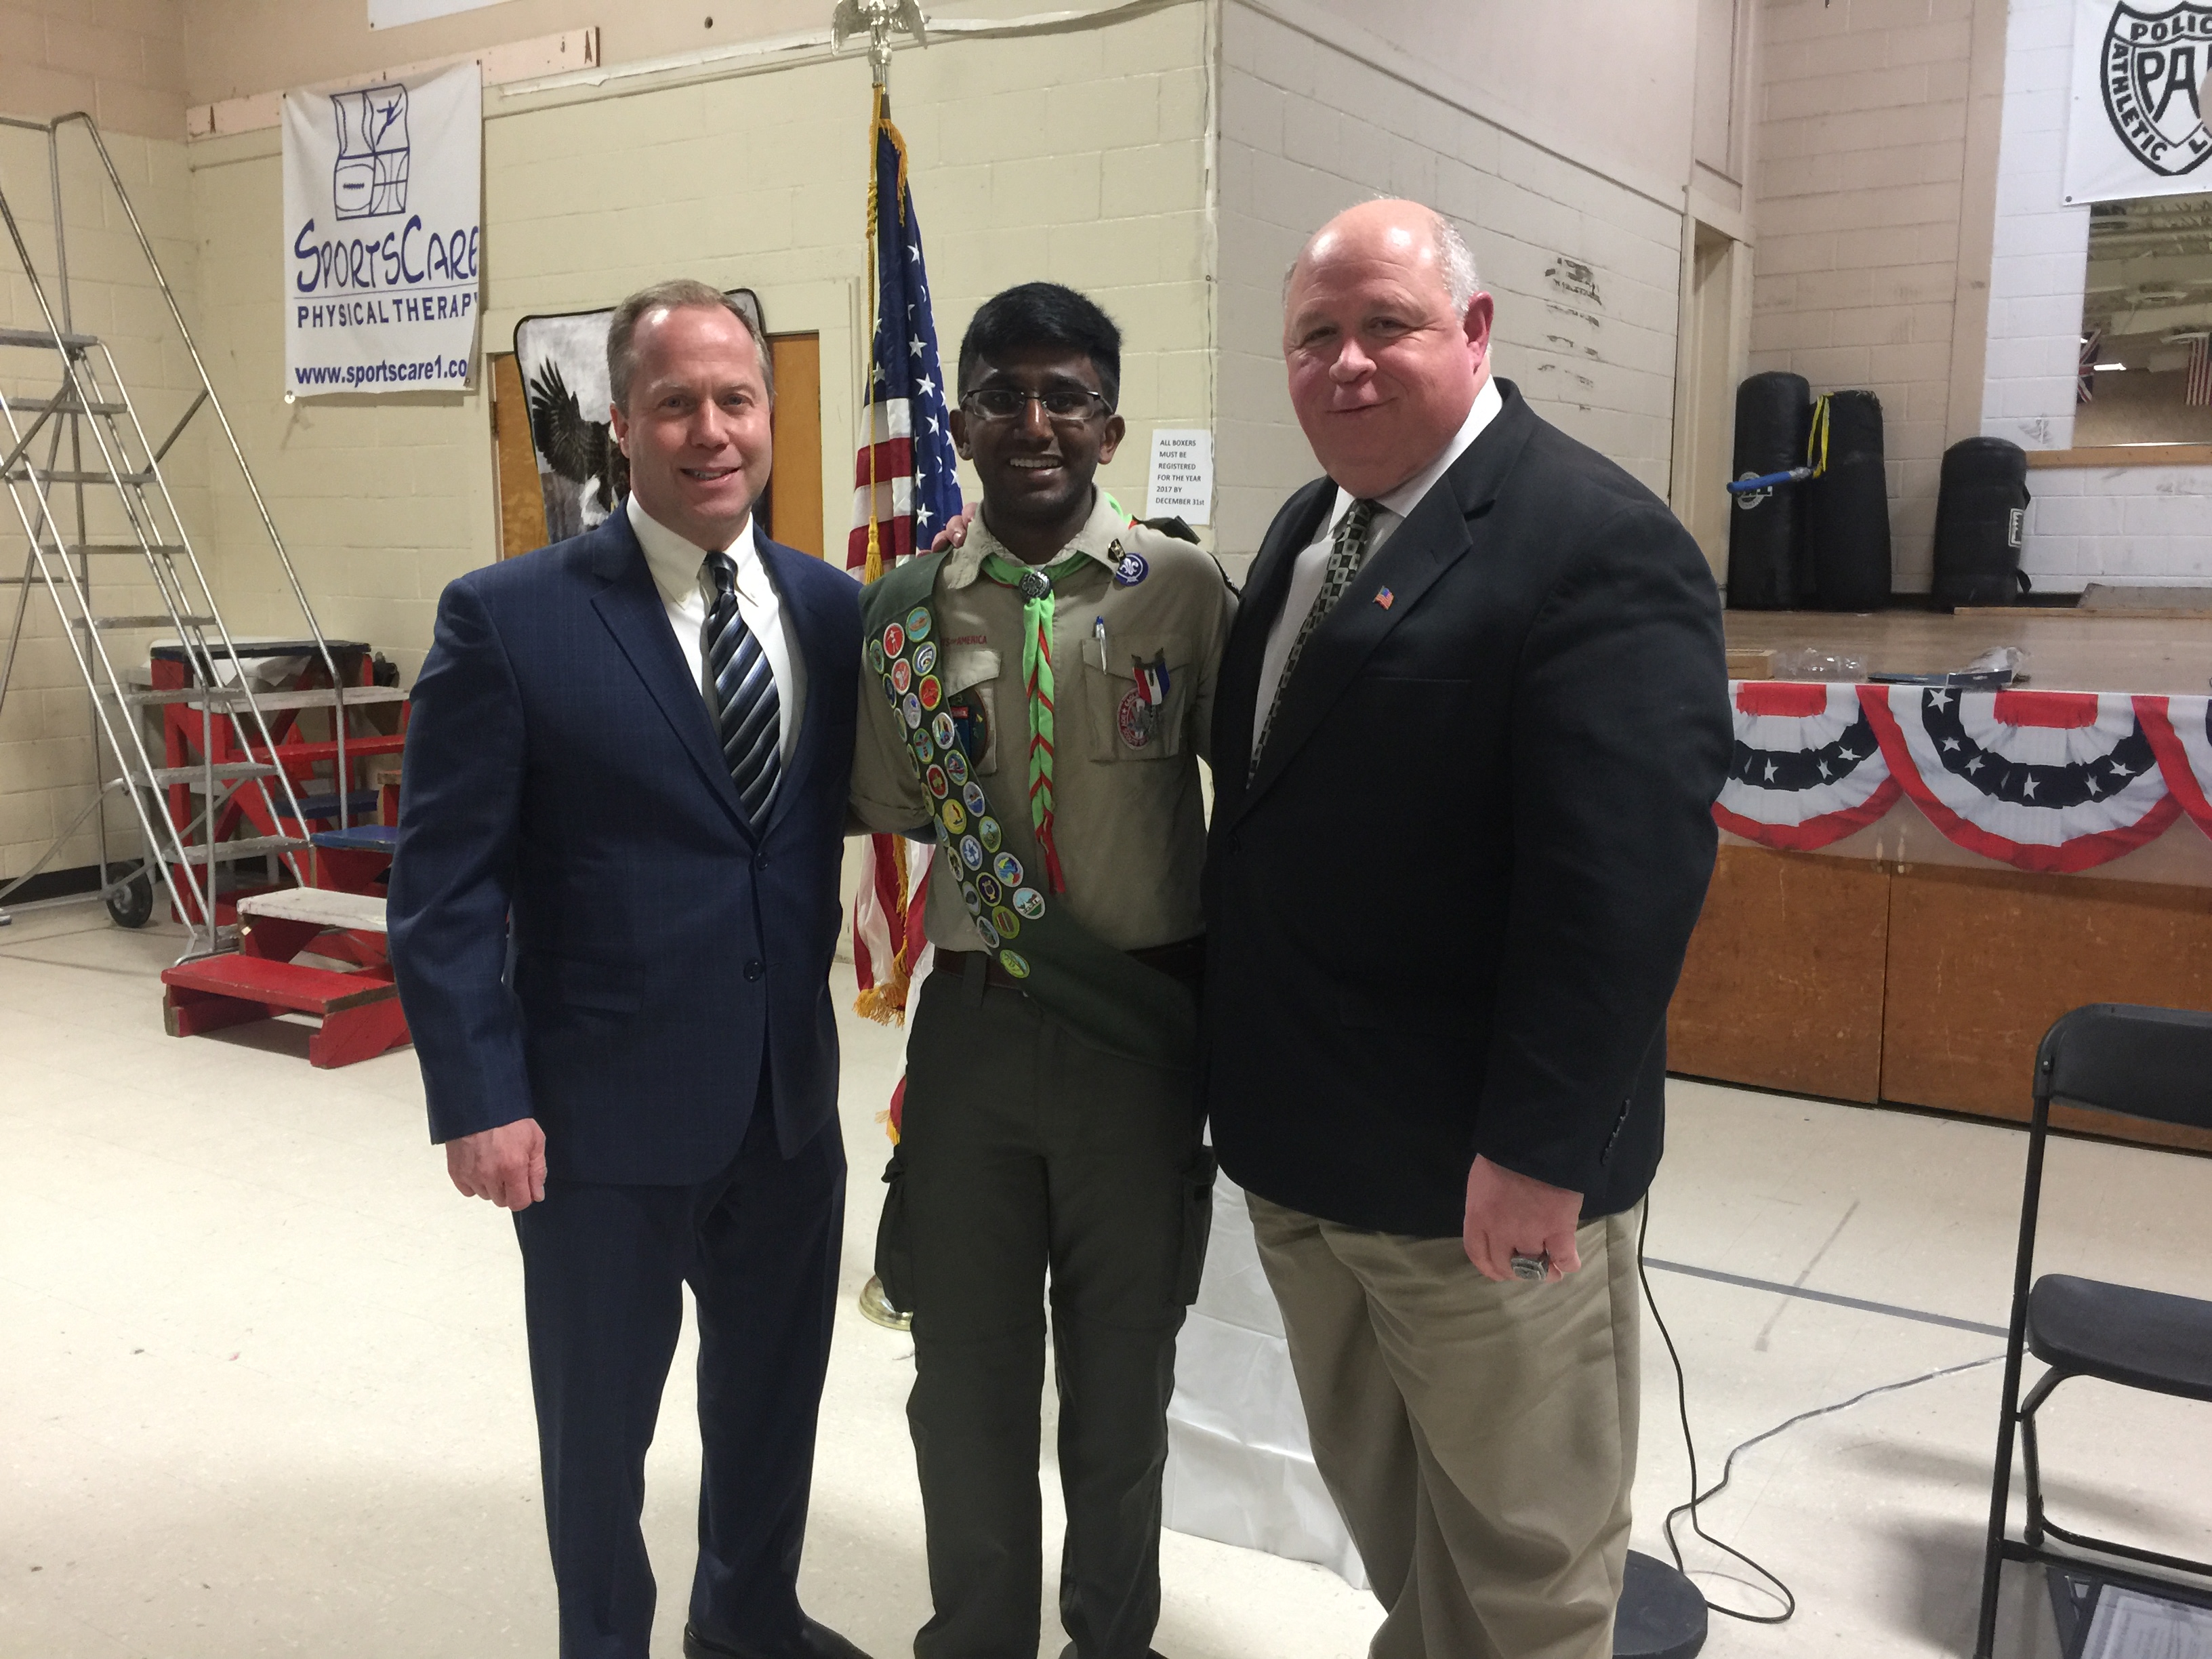 Rishi Sai Konkesa of Troop 173 in Parsippany earns the Rank of Eagle Scout